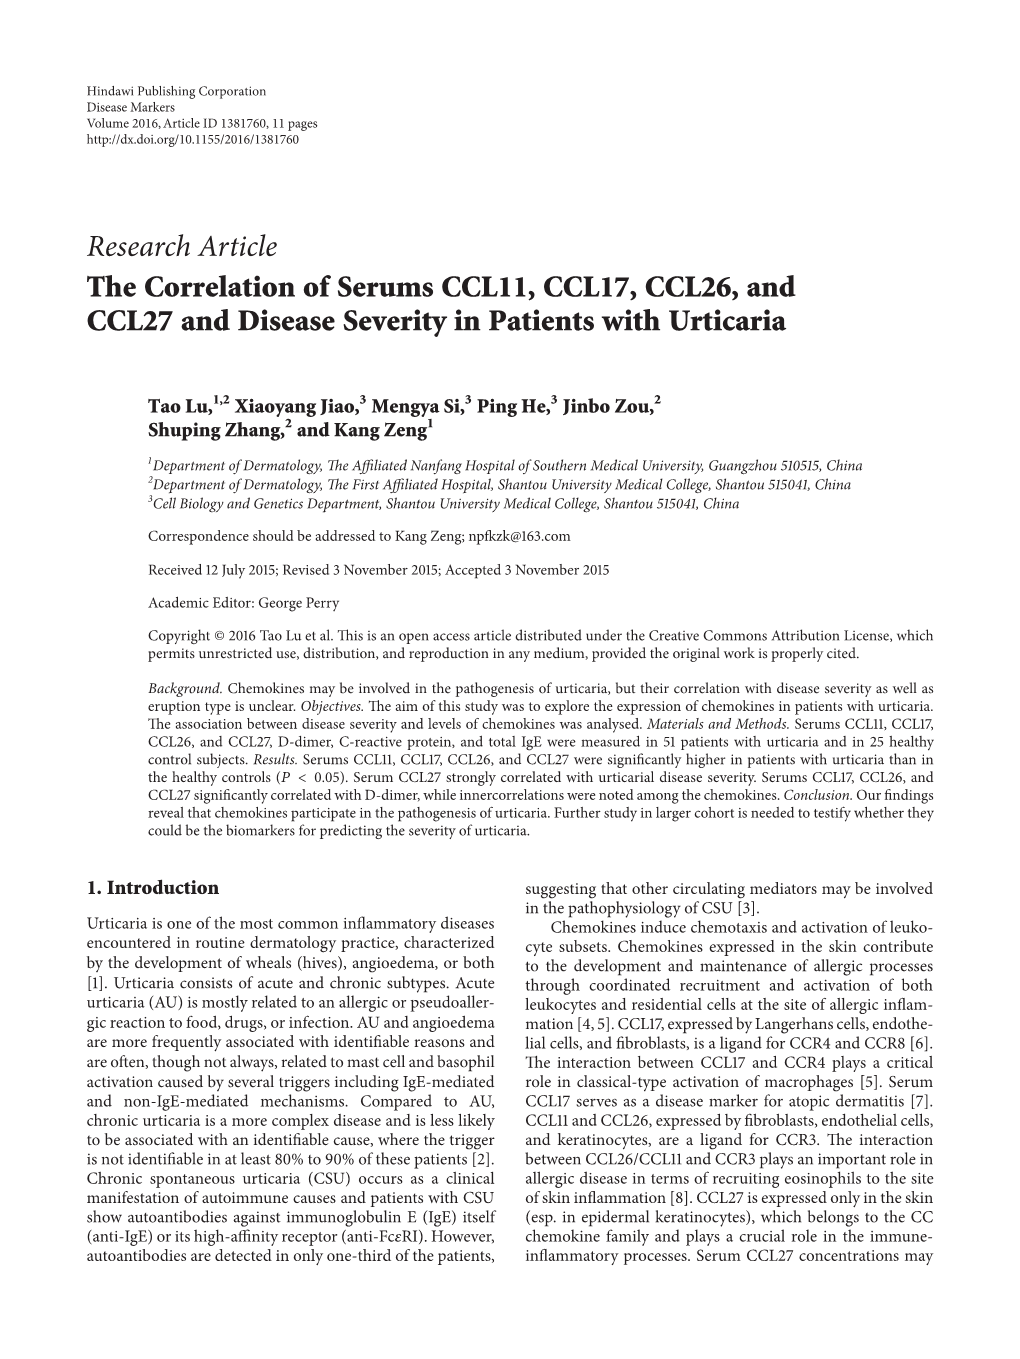 The Correlation of Serums CCL11, CCL17, CCL26, and CCL27 and Disease Severity in Patients with Urticaria